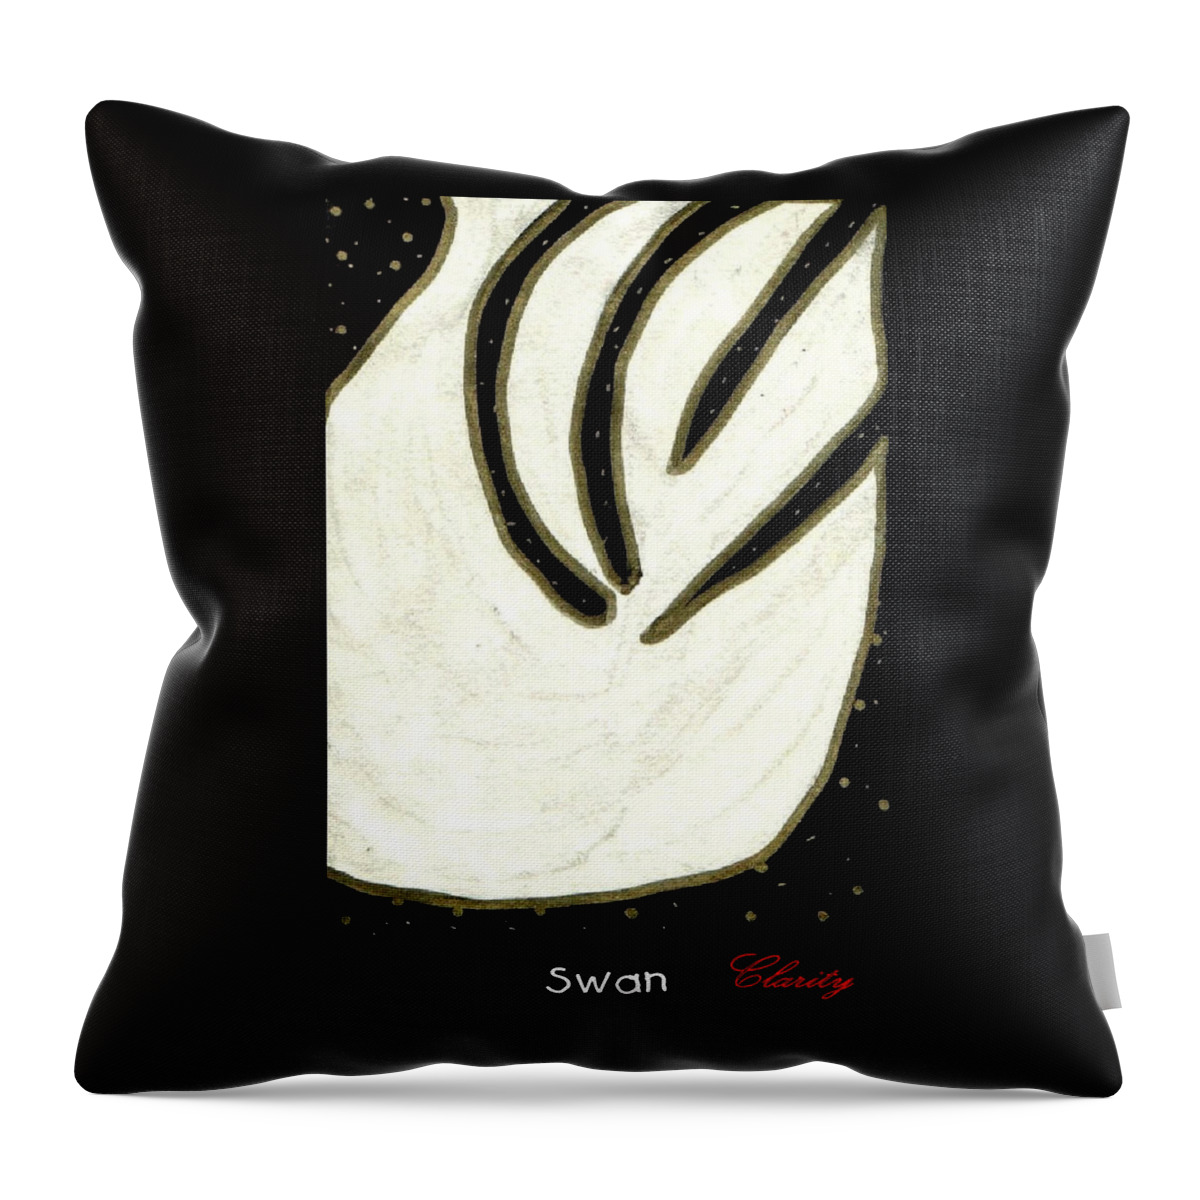 Swan Throw Pillow featuring the painting Swan by Clarity Artists